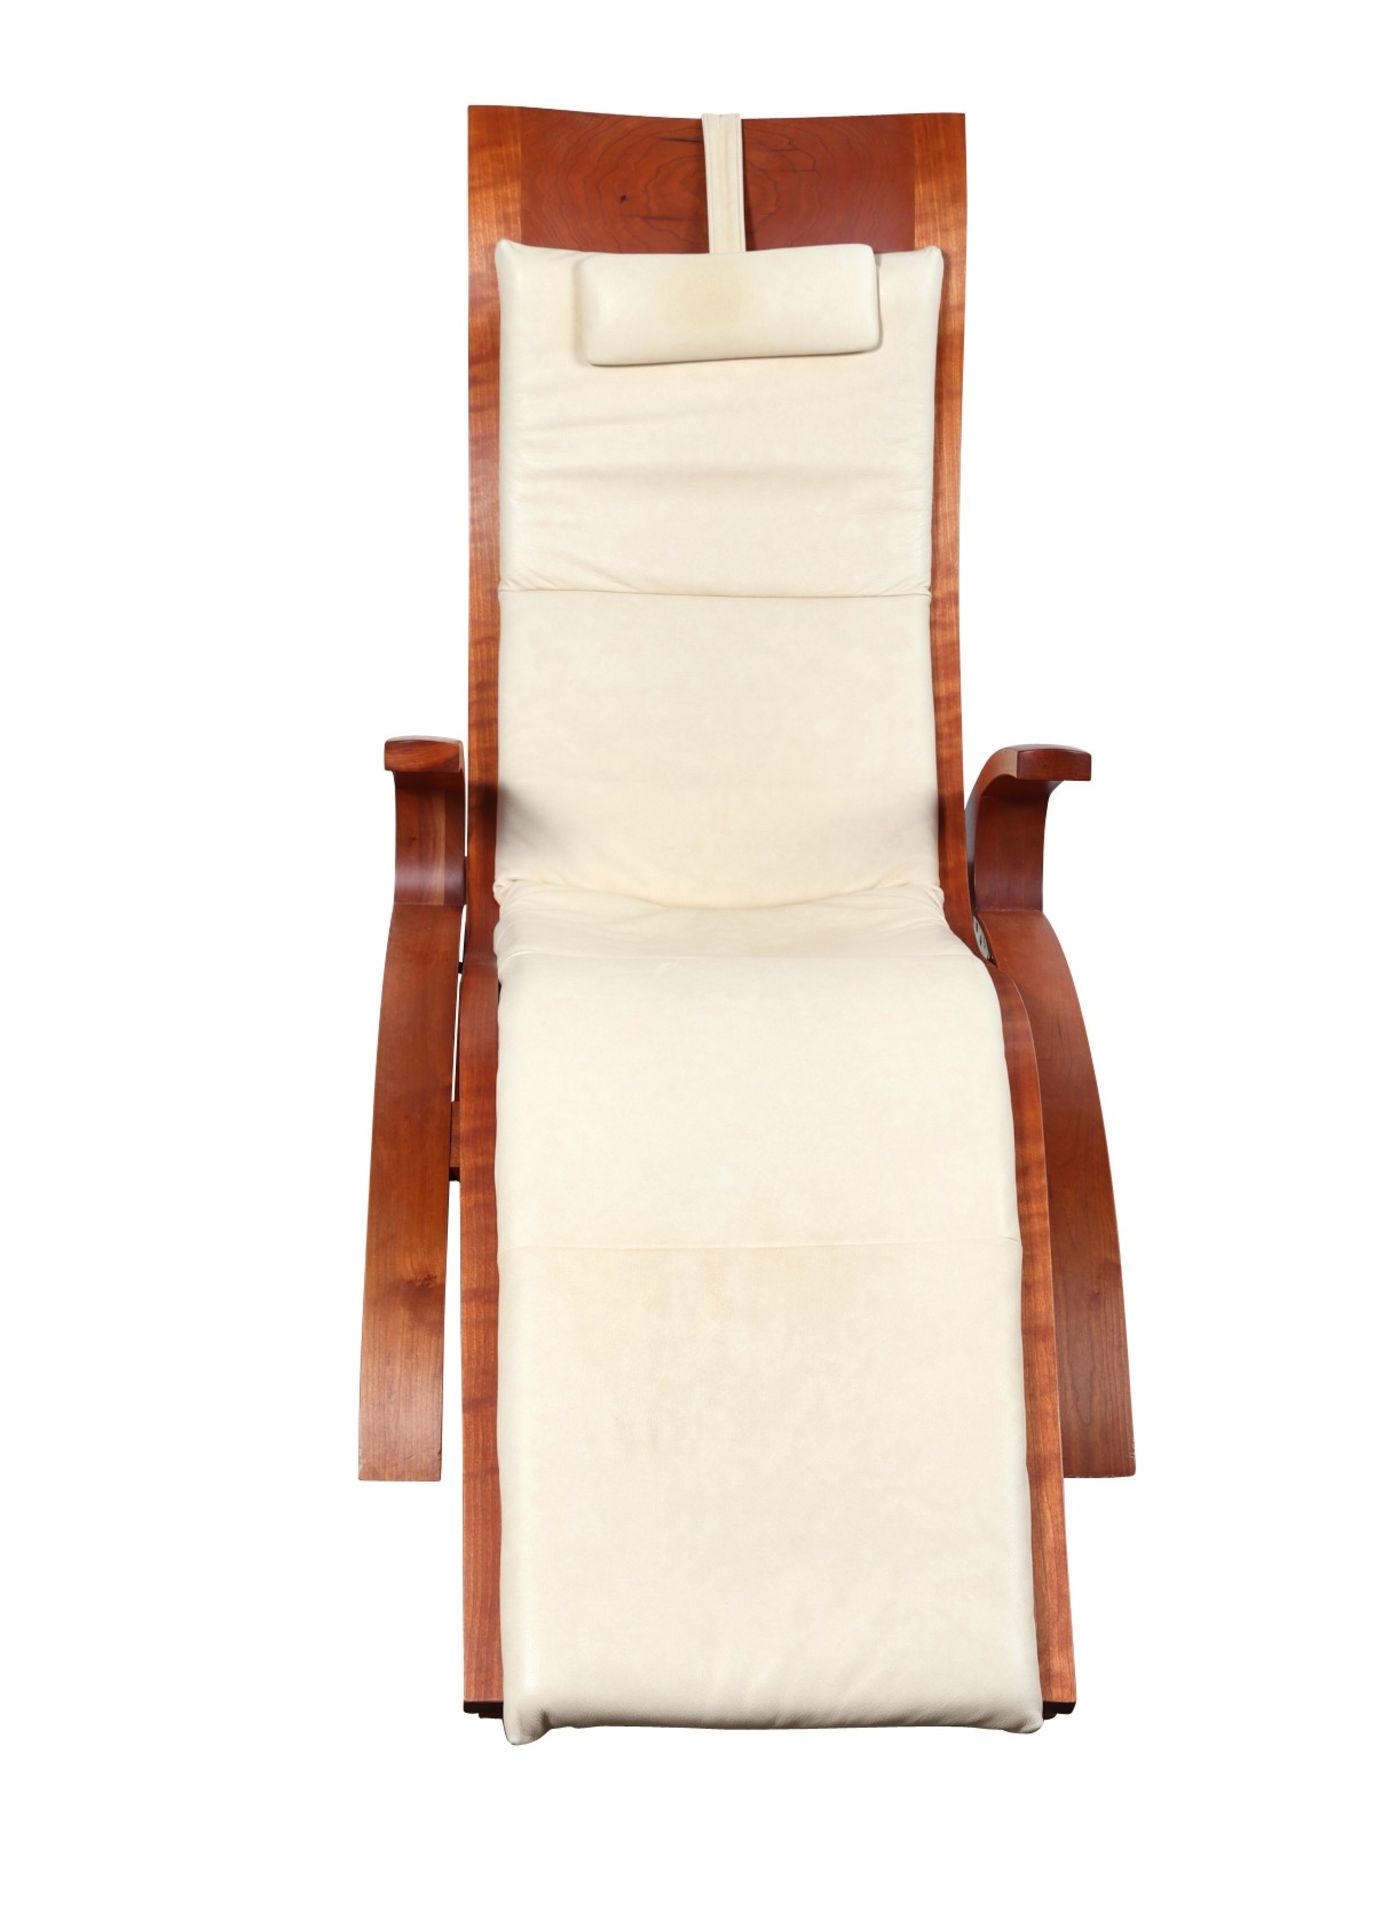 Thomas Moser White Leather Chaise - Image 3 of 8